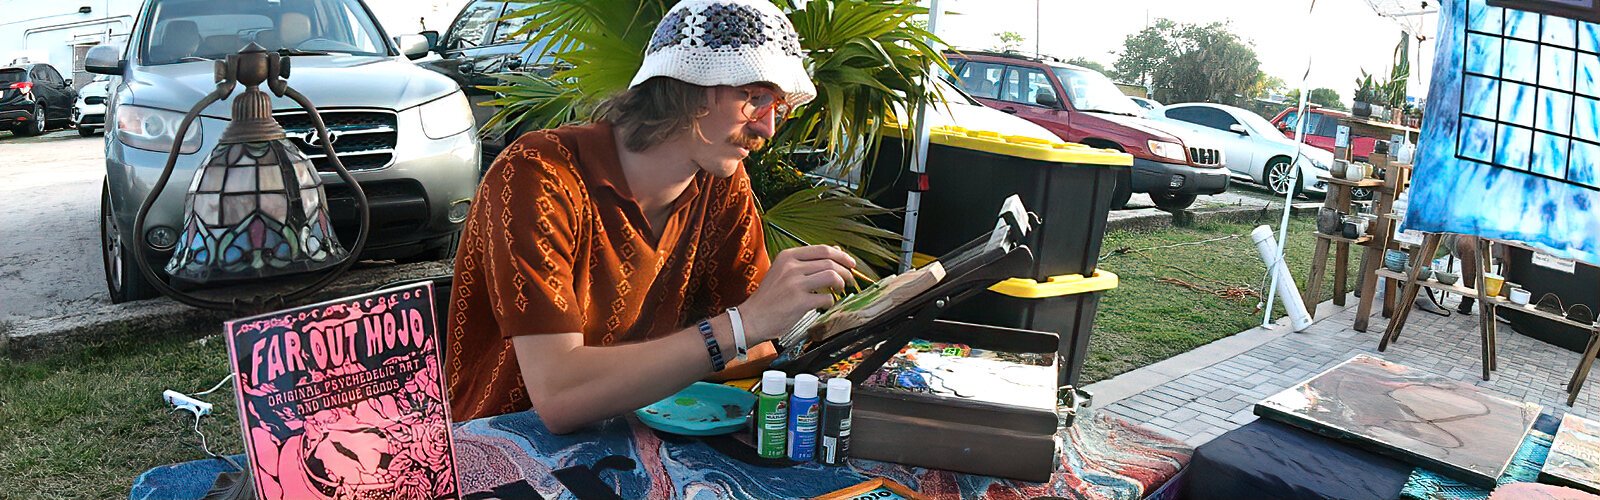  Alec Ward of Far Out Mojo works on a new piece in his outdoor booth at the ArtsXchange campus during the Second Saturday ArtWalk.